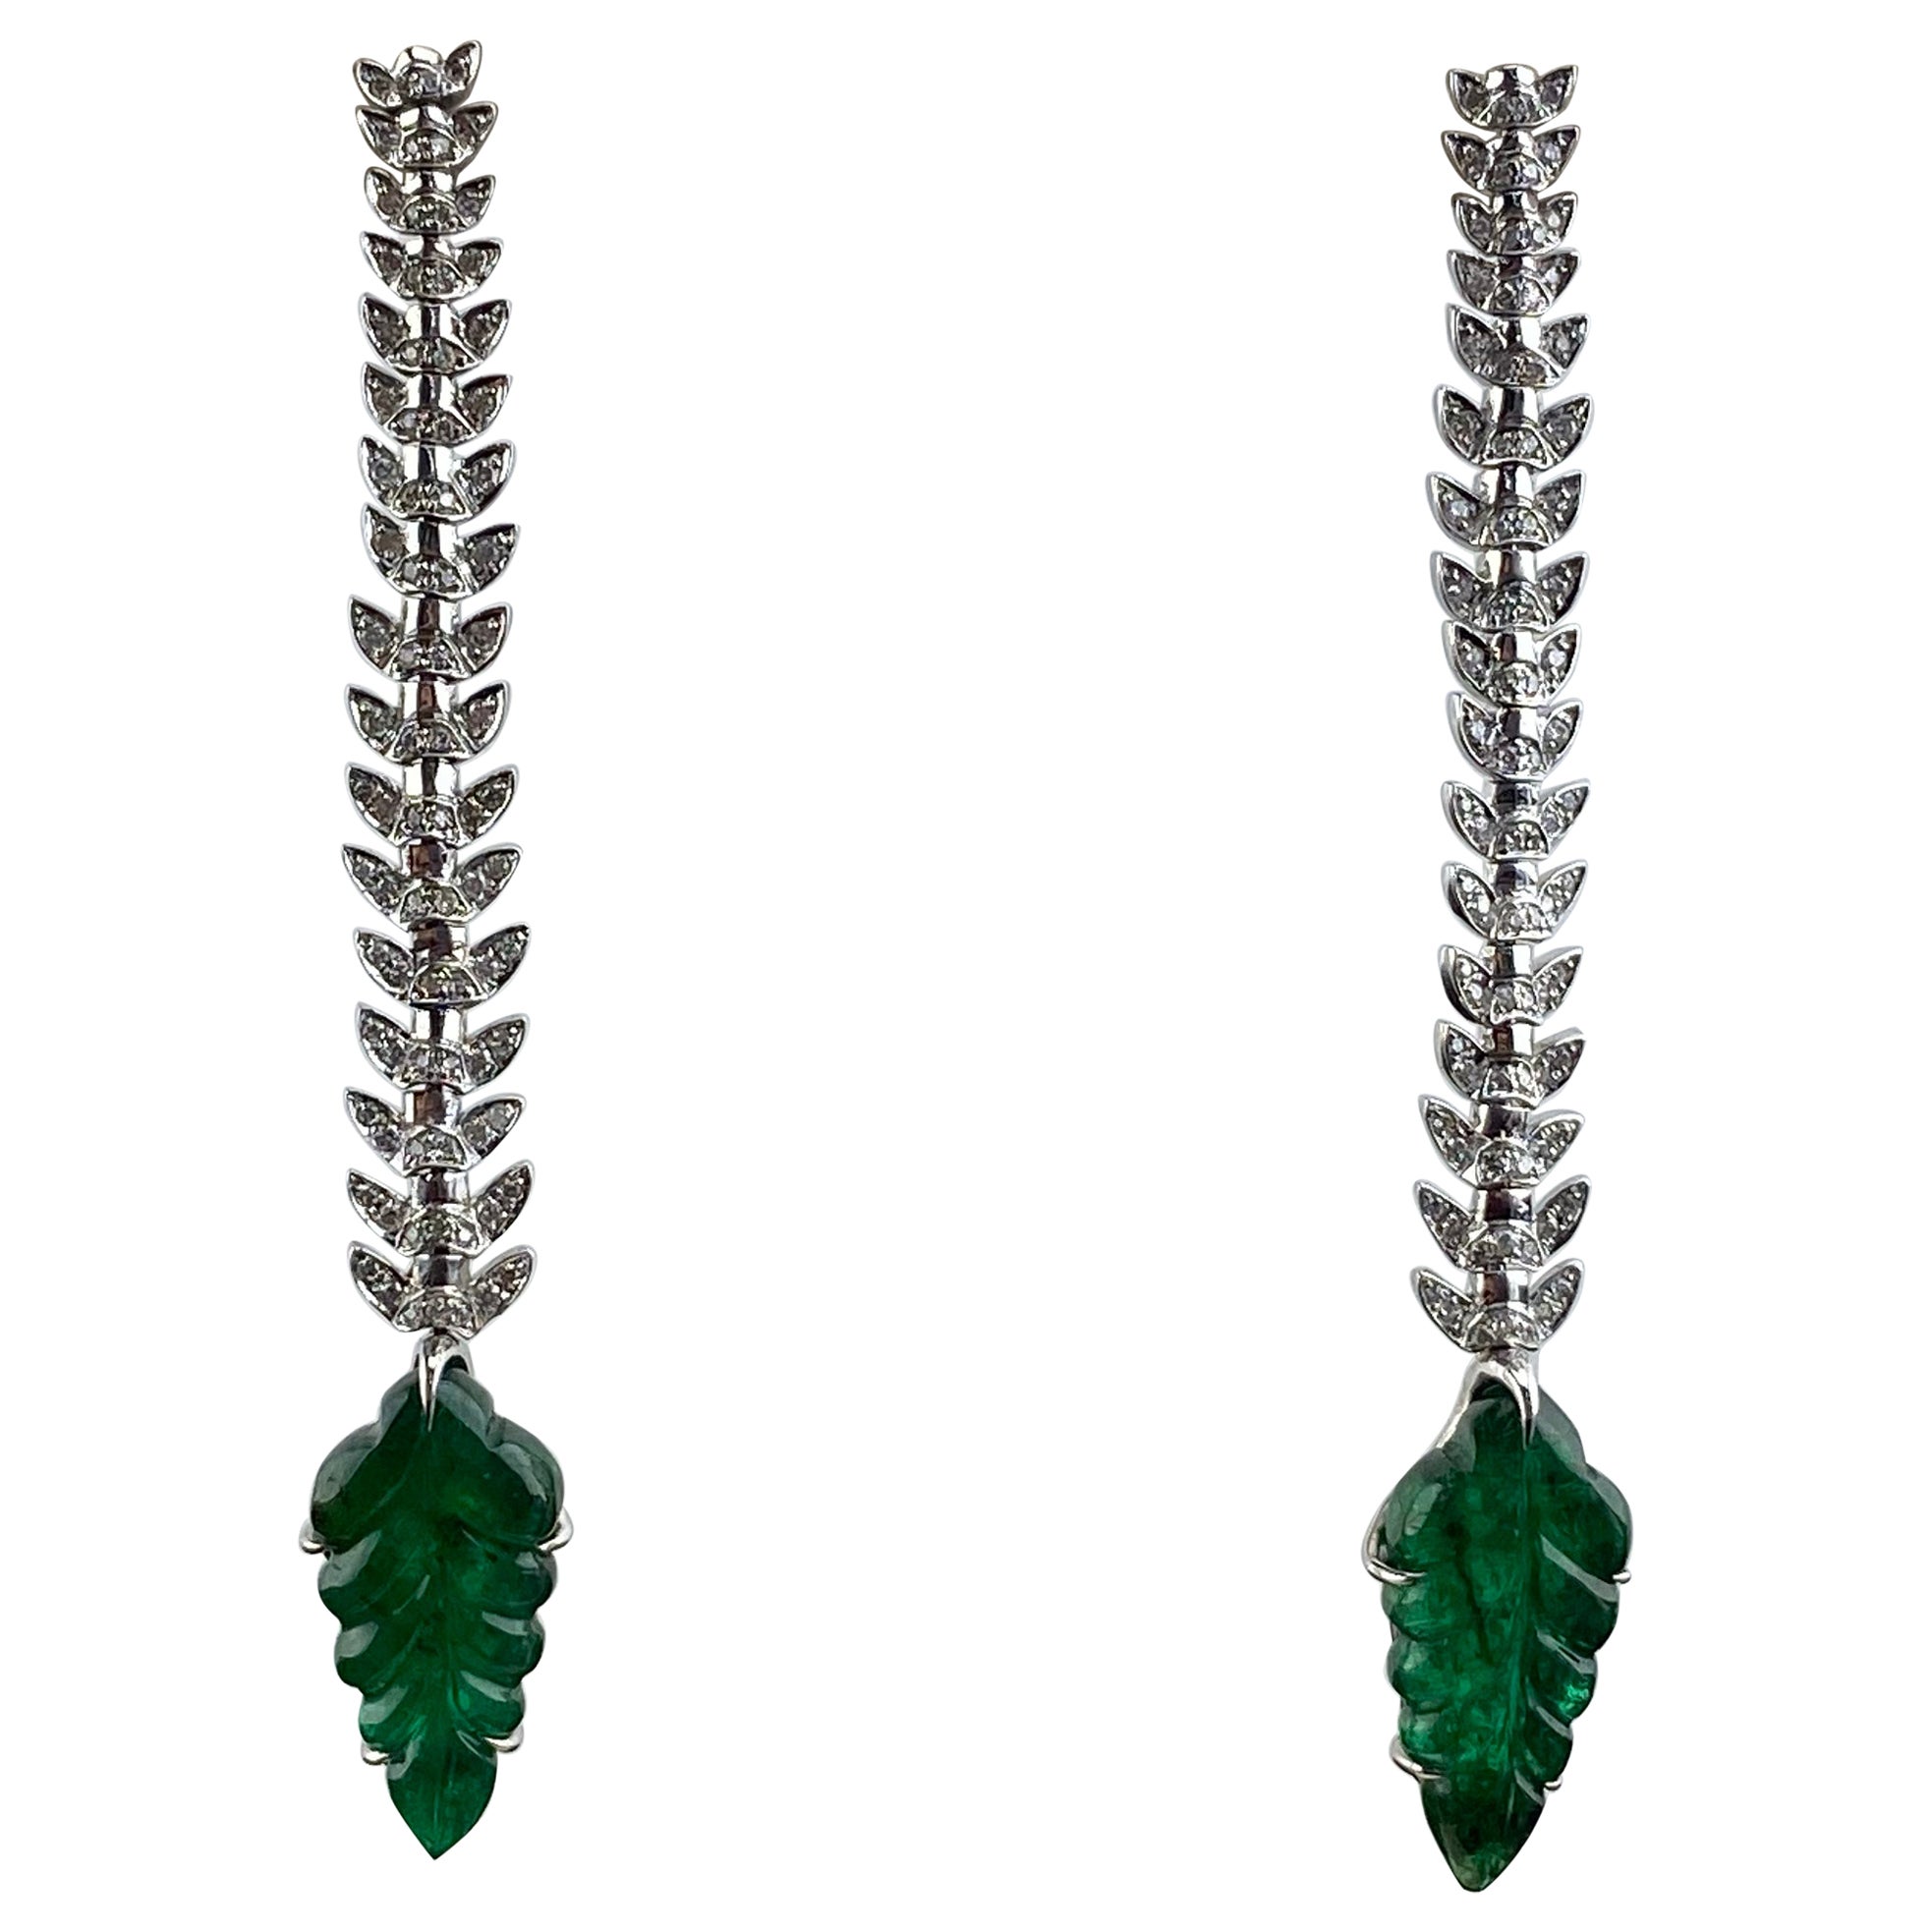 Carved Emerald and Diamond Dangle Earrings in 18K White Gold